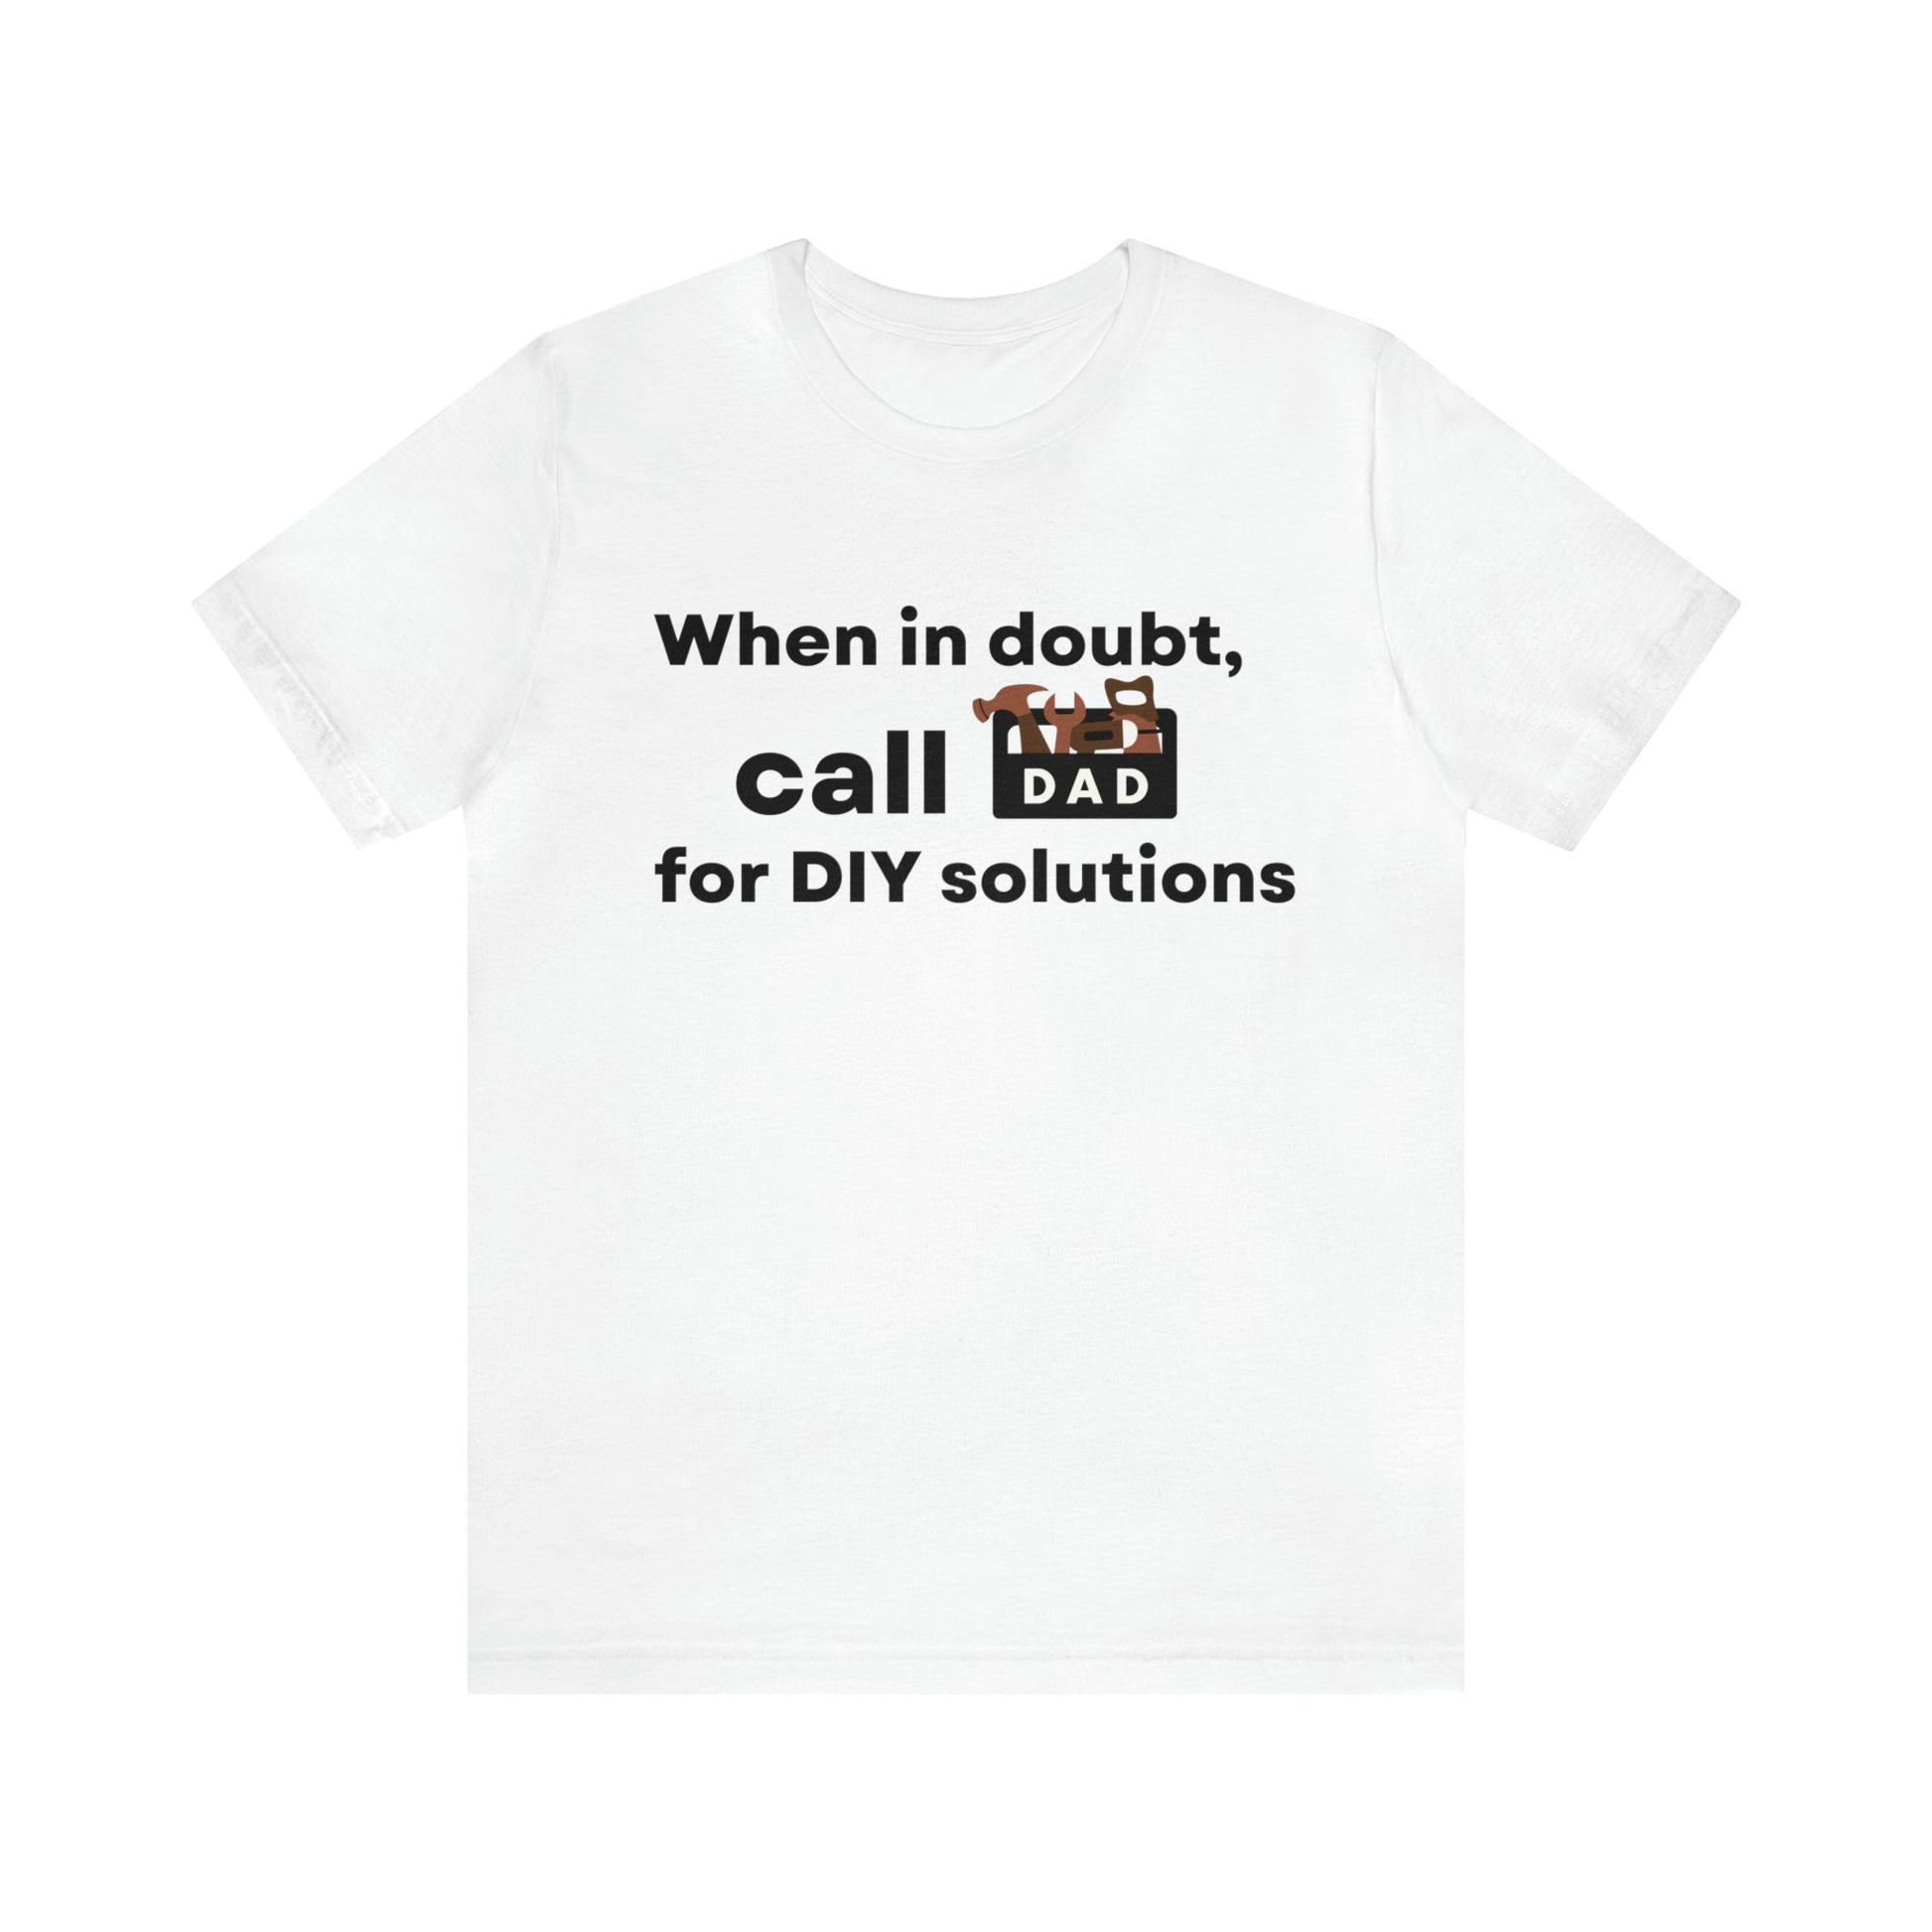 When In Doubt Call DAD For DIY Solutions T-Shirt 🛠️📞-T-Shirt-White-S-mysticalcherry